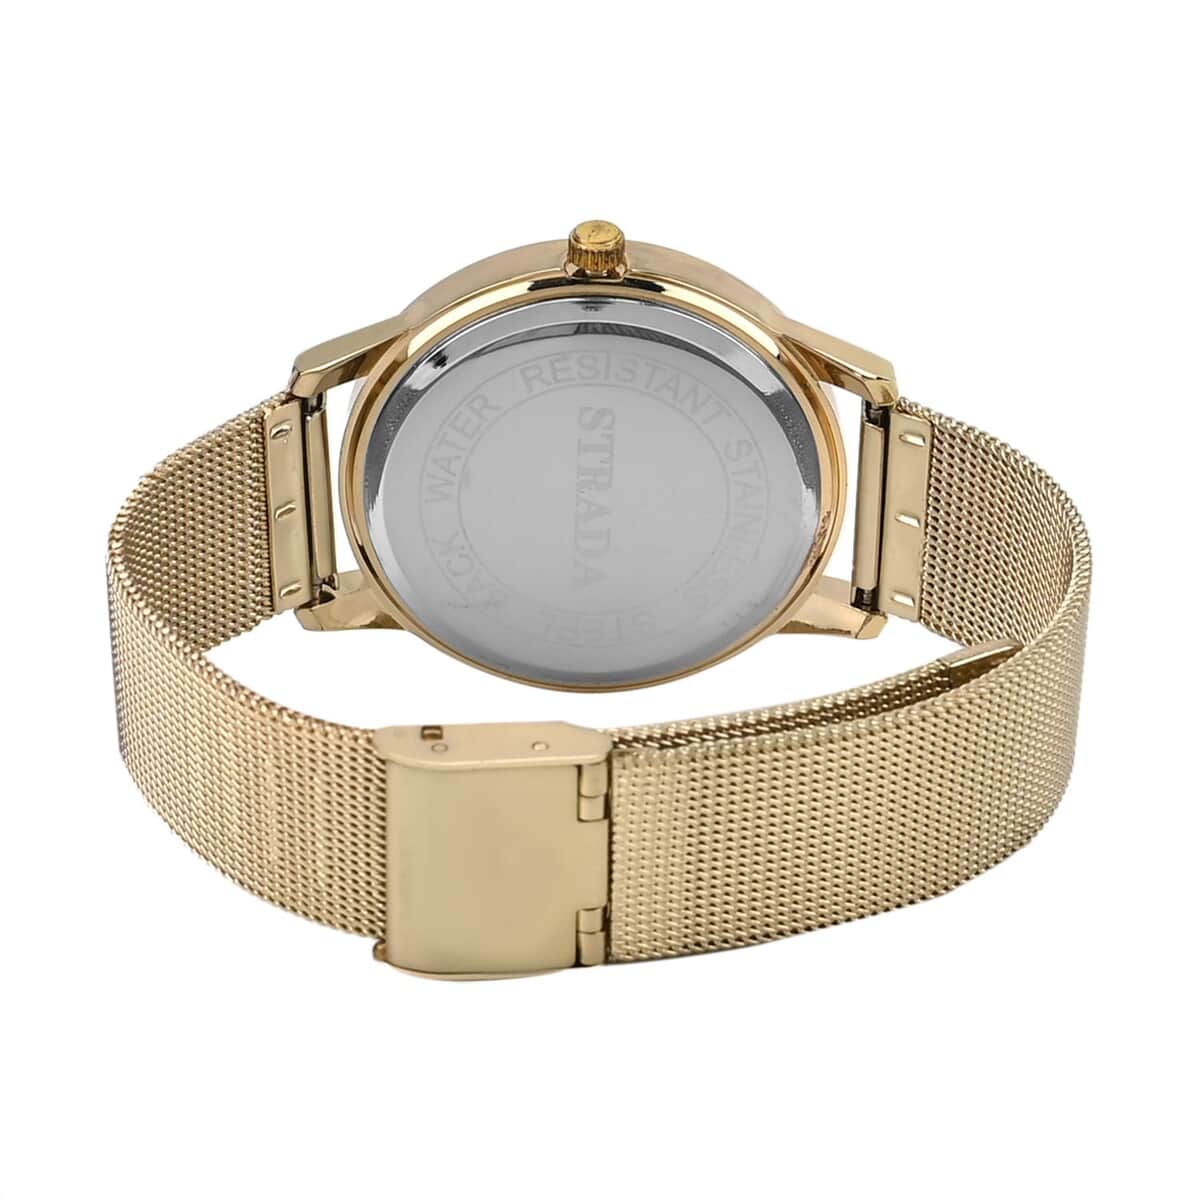 Strada White Austrian Crystal Japanese Movement Watch in Goldtone with Stainless Steel Mesh Belt Strap (36.06 mm) (6.50-7.50 Inches) image number 6